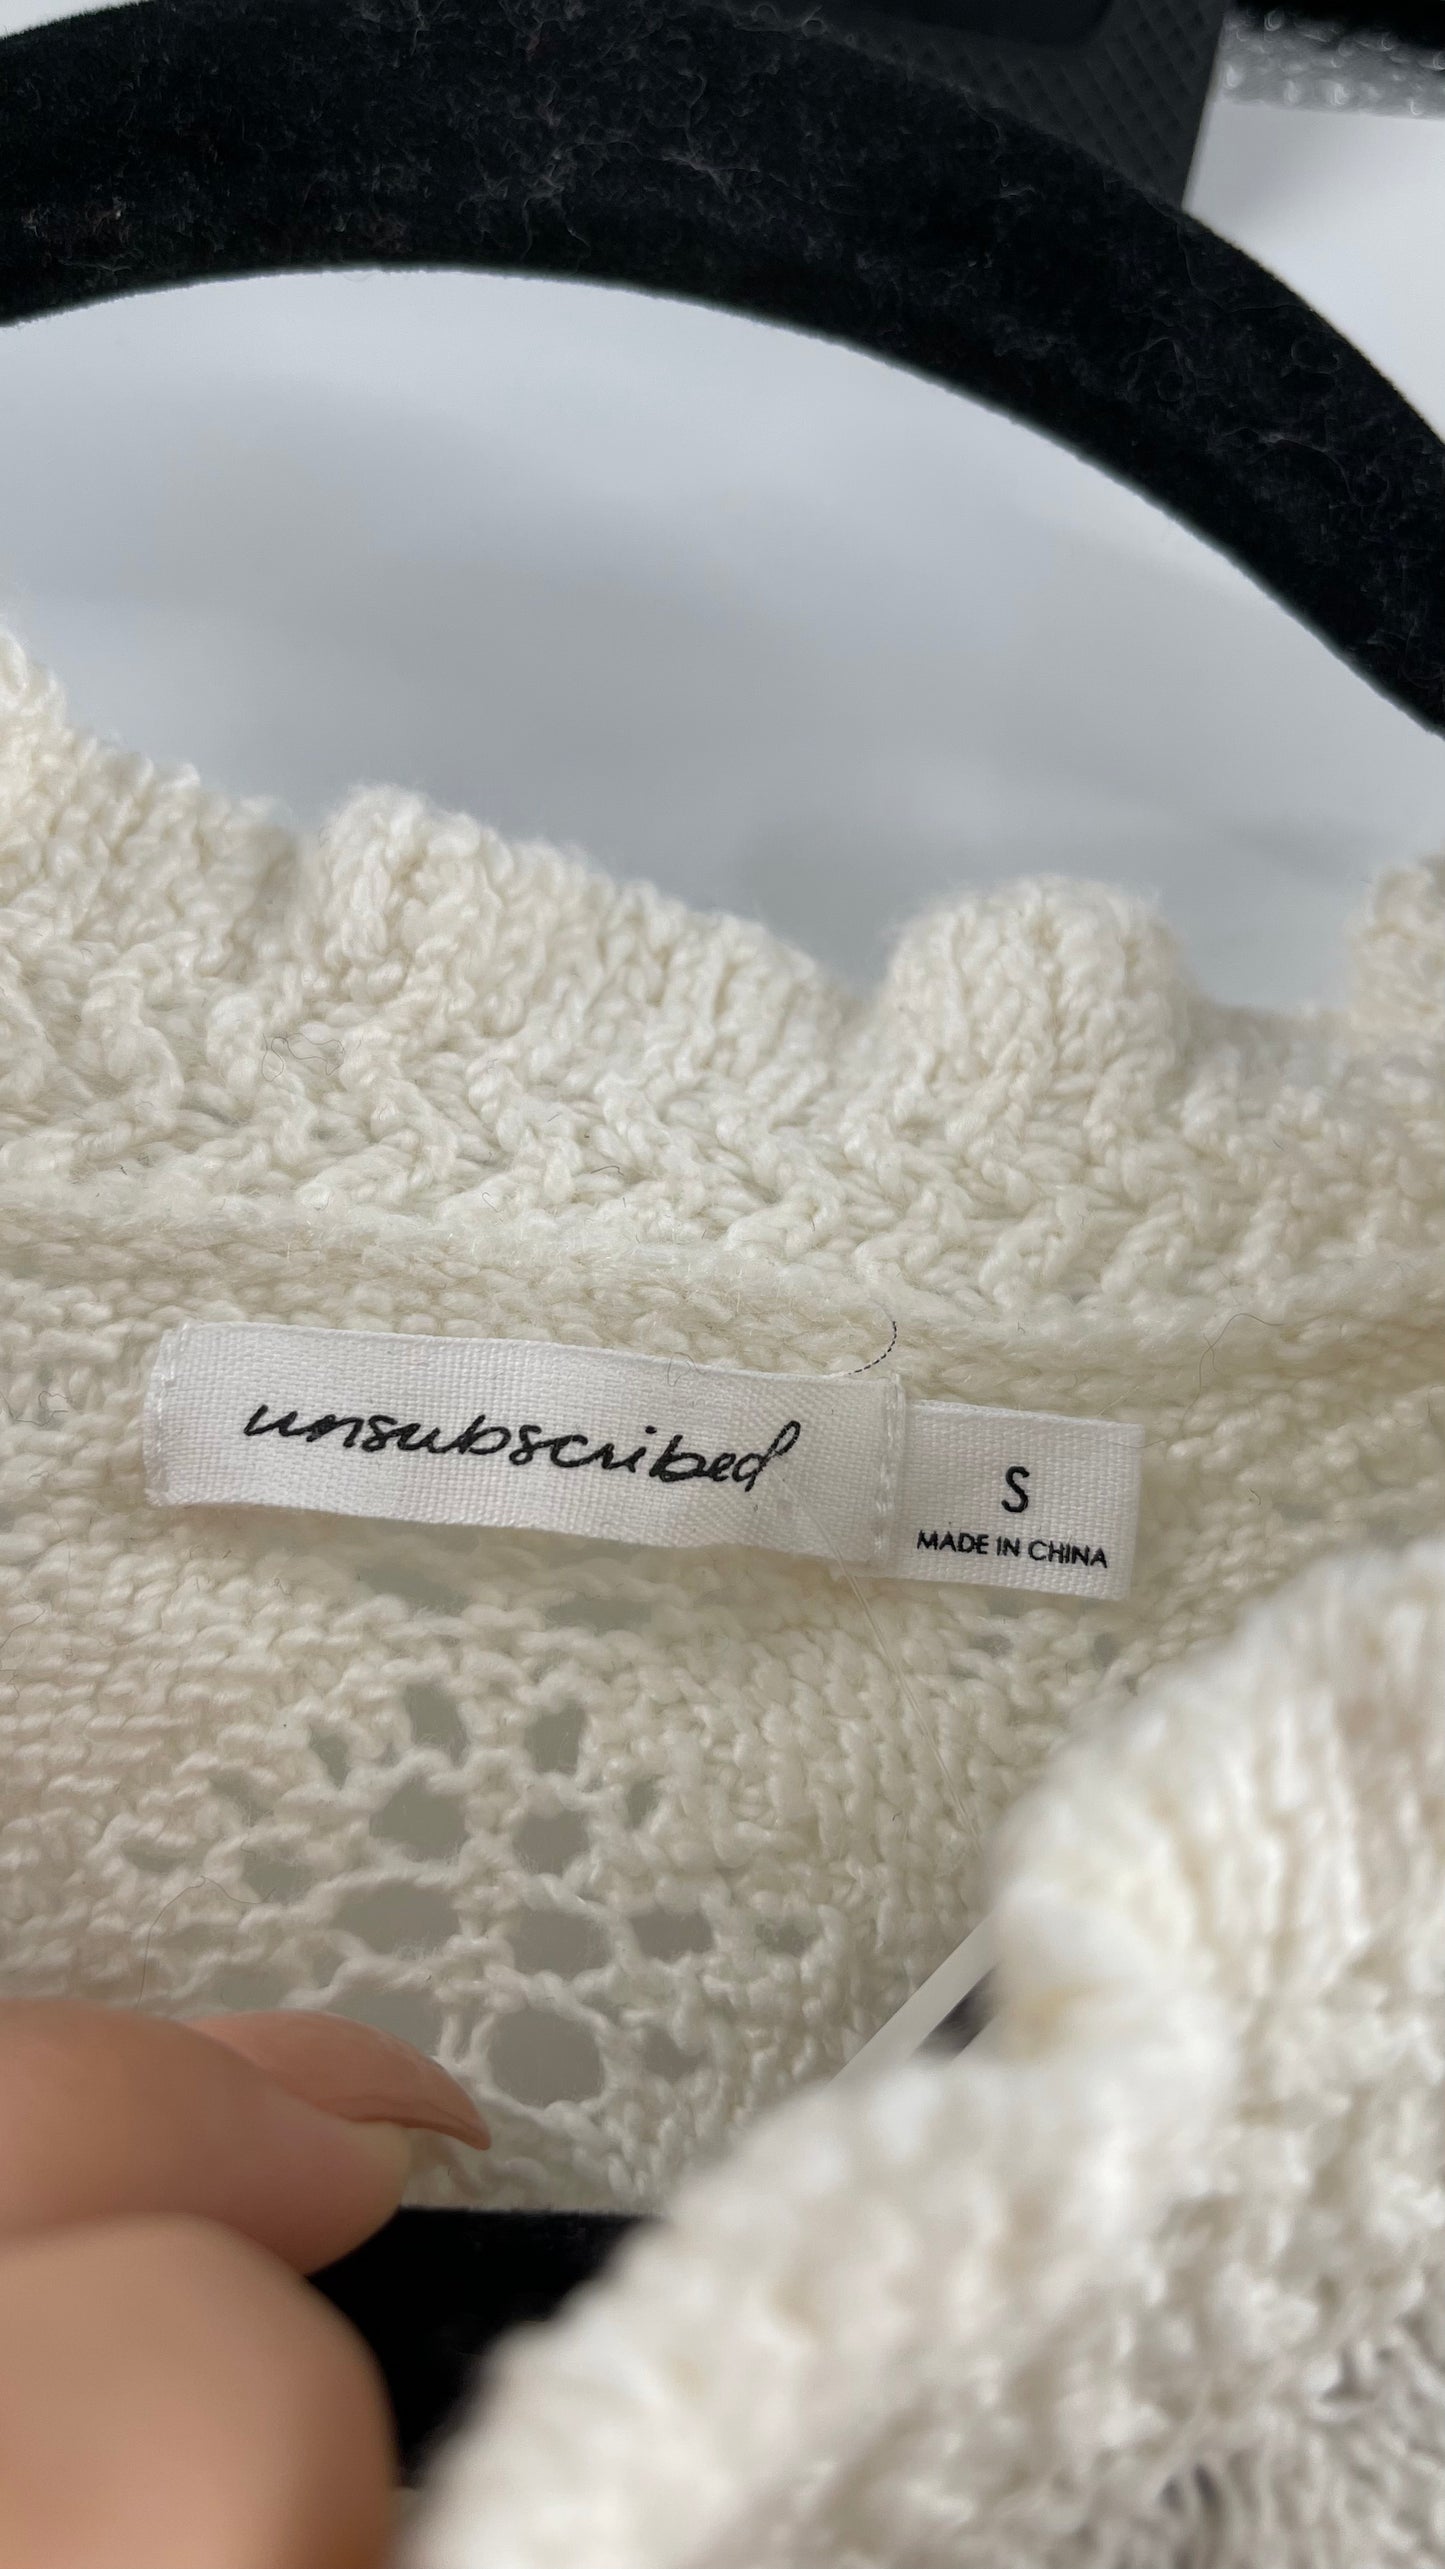 UNSUBSCRIBED Cream Sweater Size S